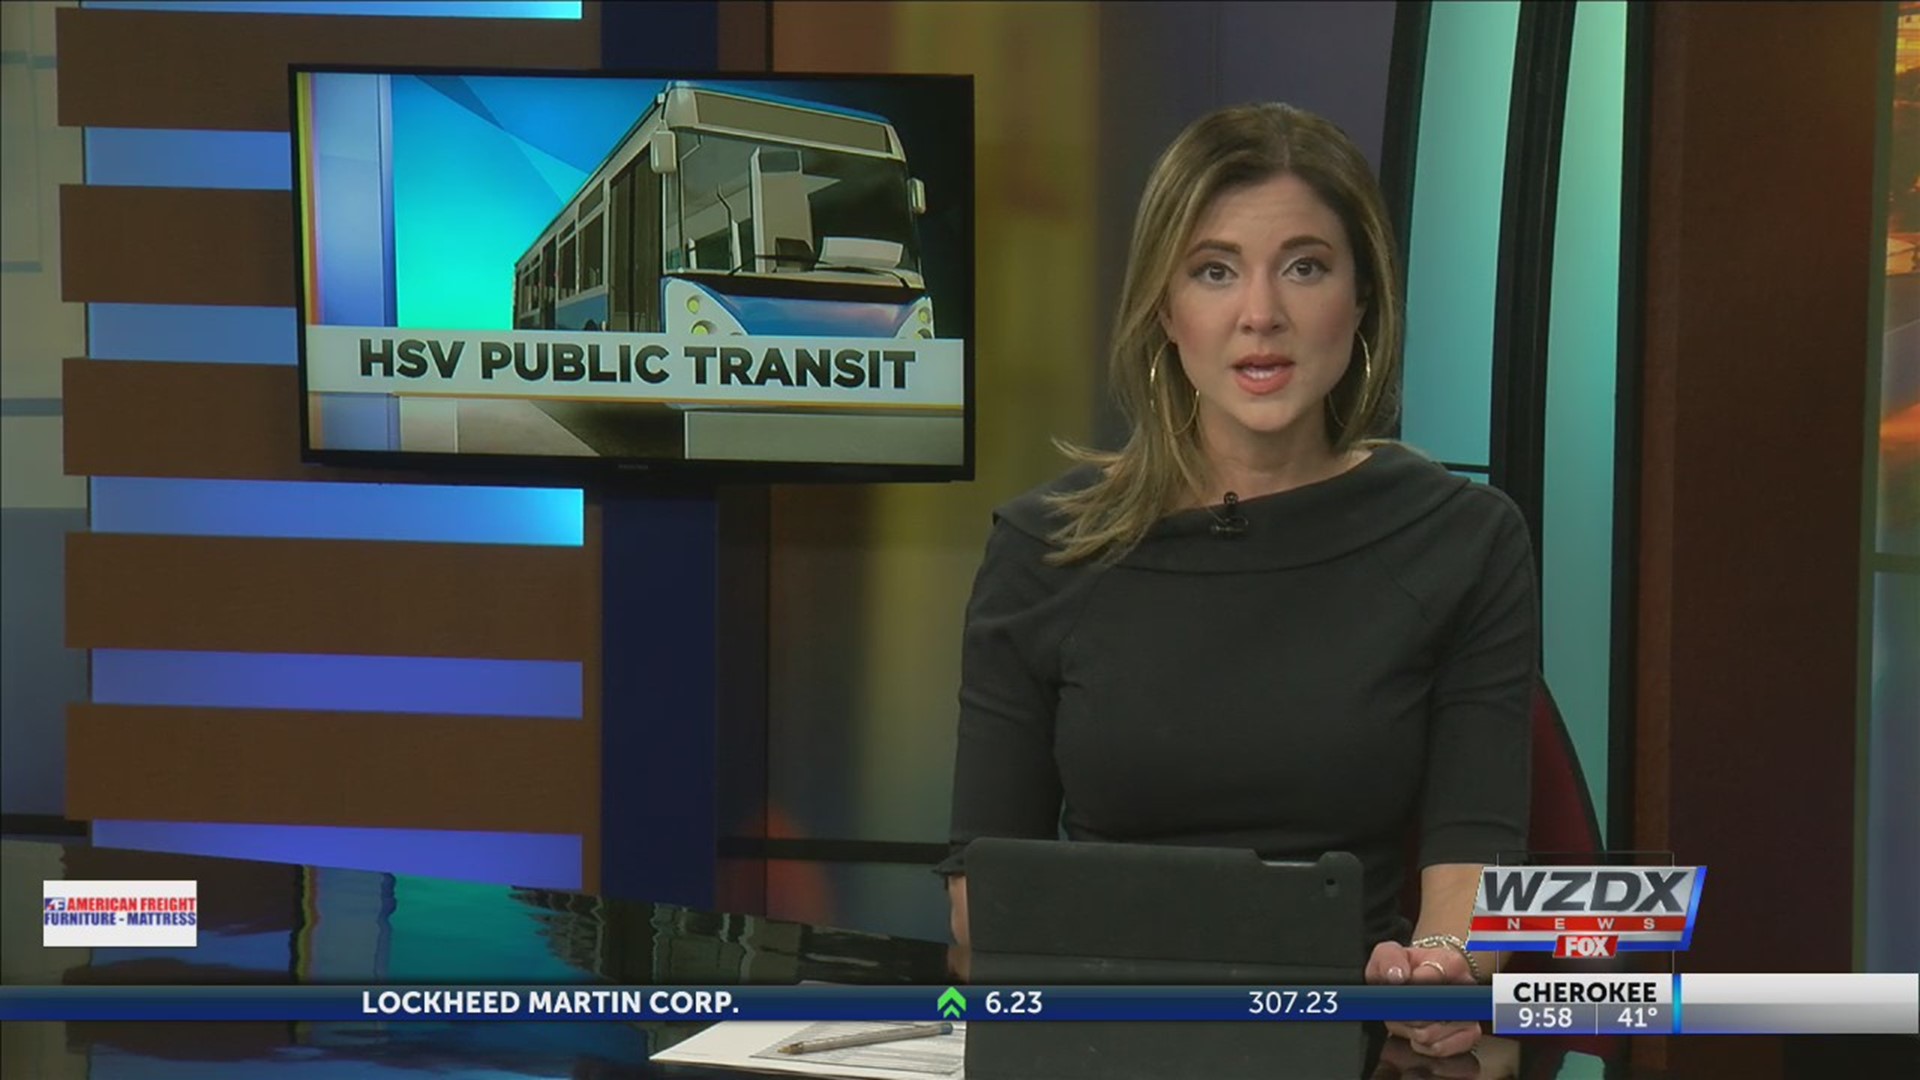 The Huntsville Public Transit has a five year plan to grow and expand service.